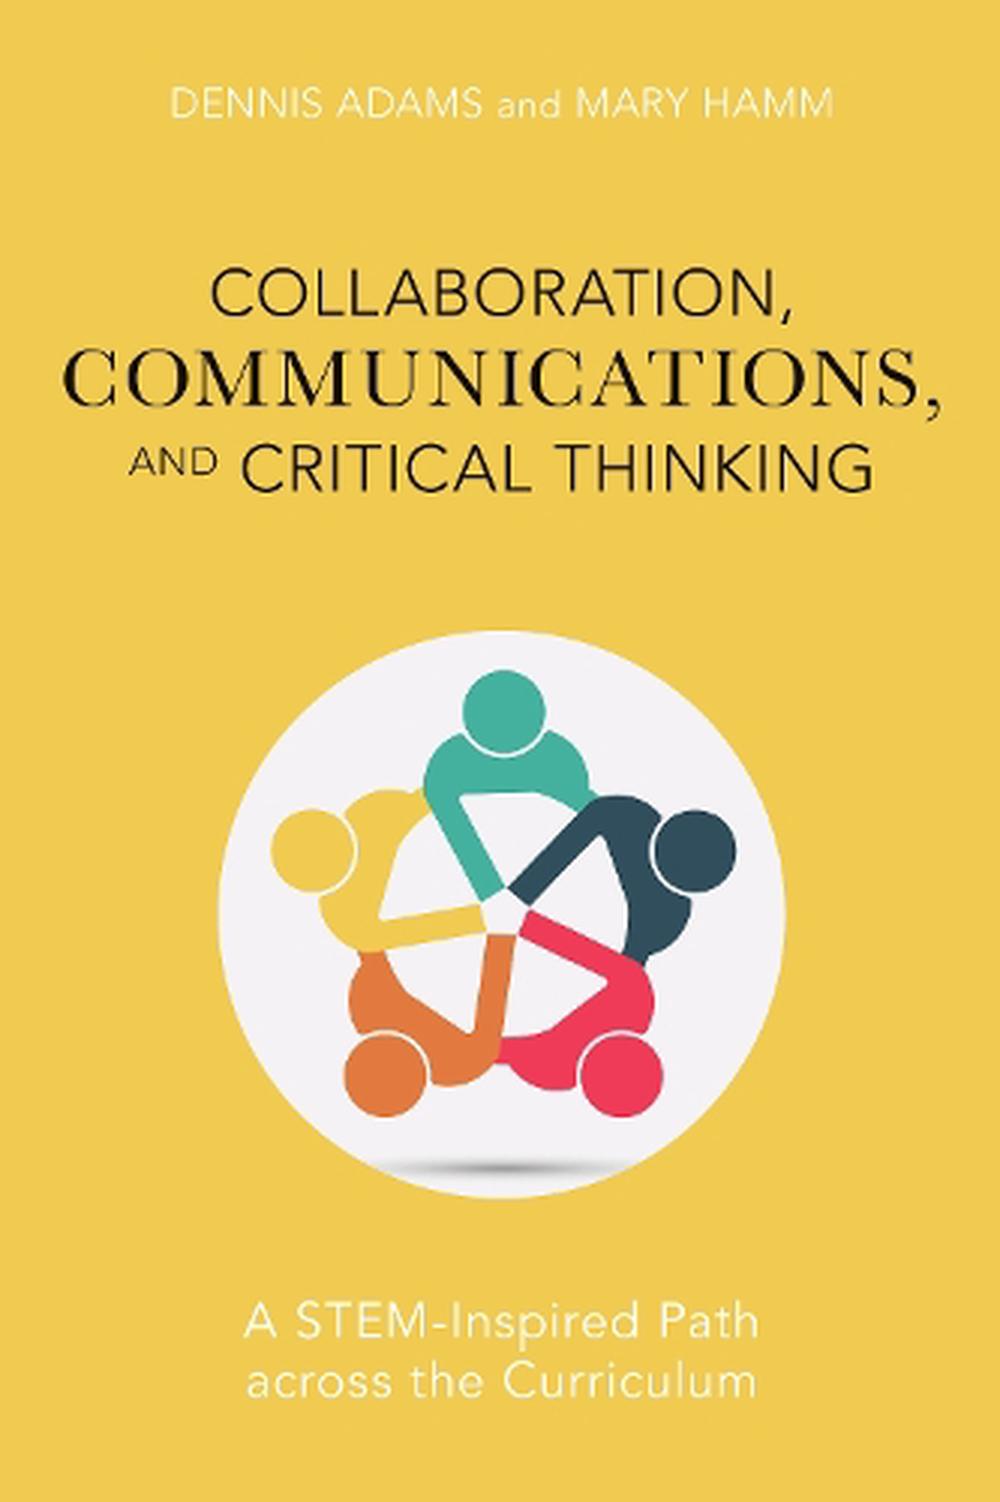 the book of original entry critical thinking communication and collaboration